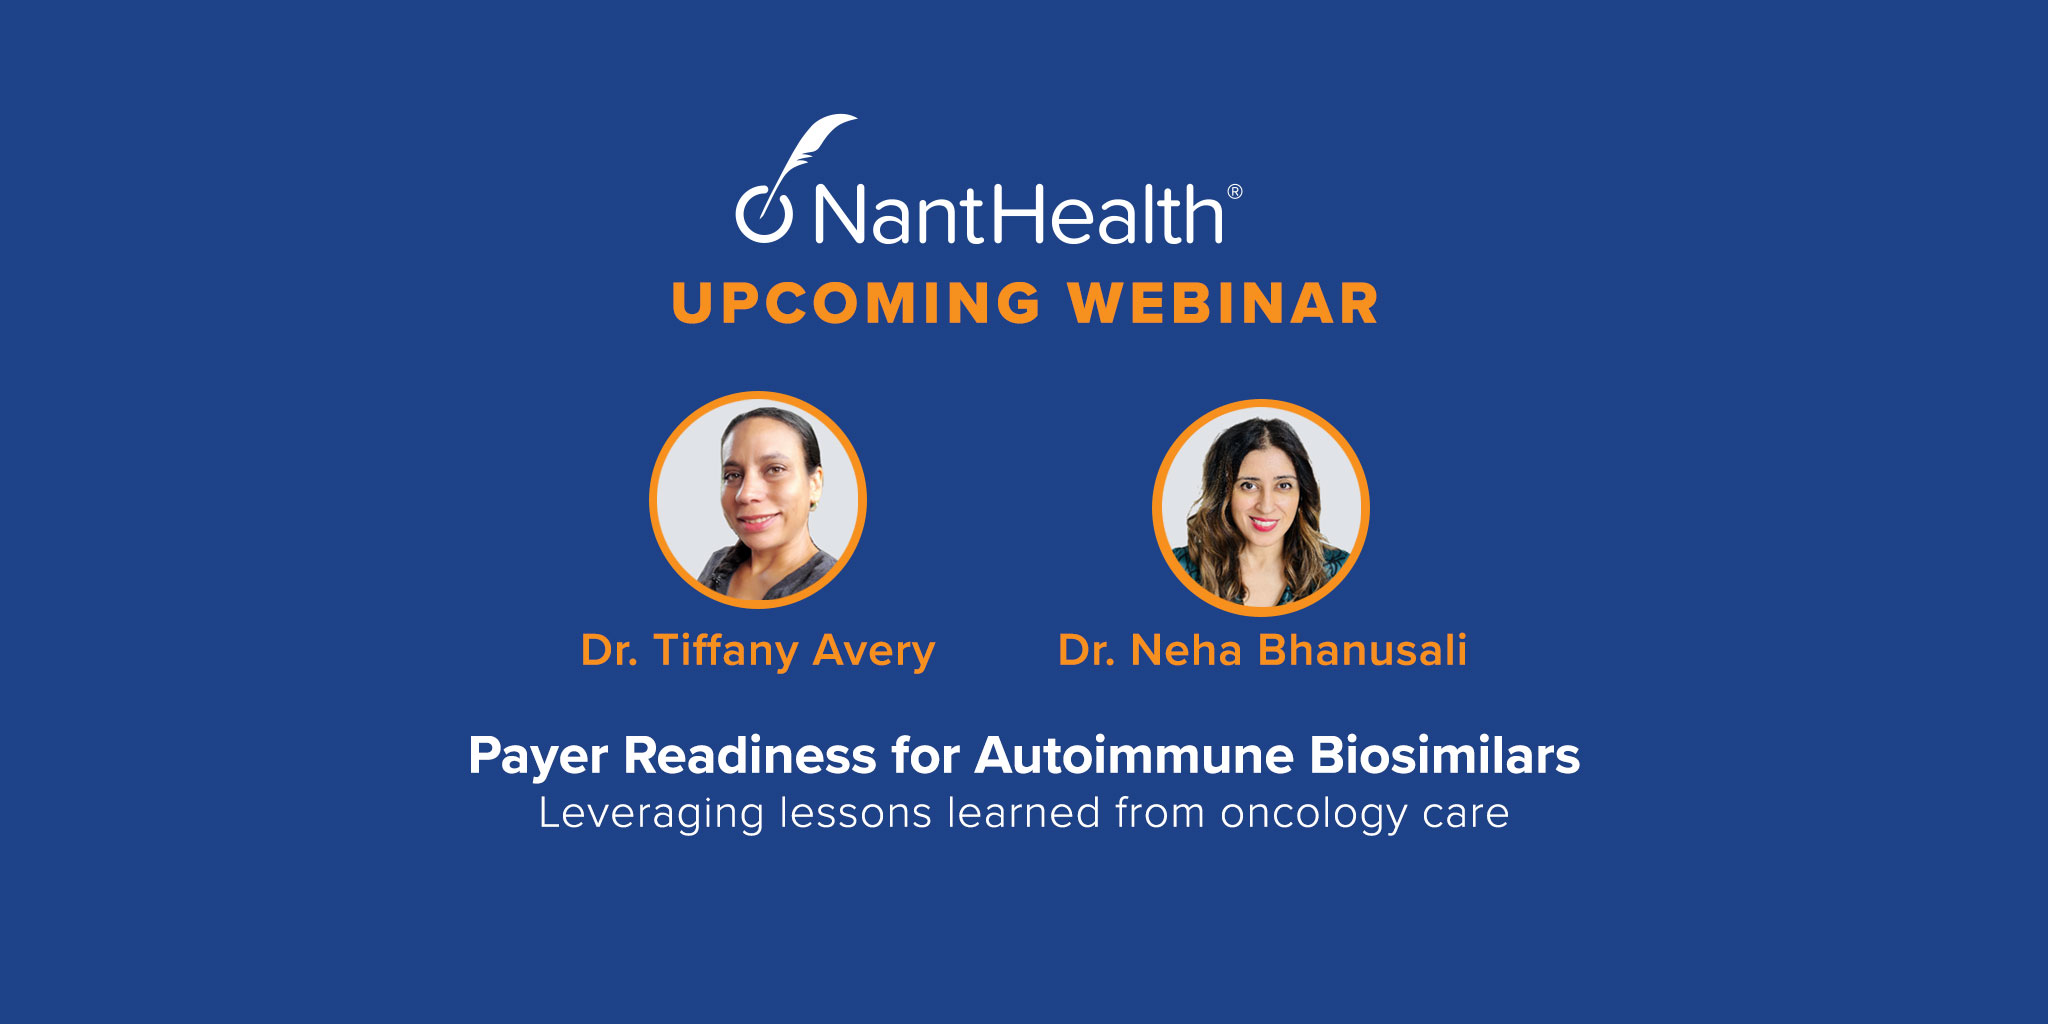 UPCOMING WEBINAR: Payer Readiness for Autoimmune Biosimilars—Leveraging lessons learned from oncology care